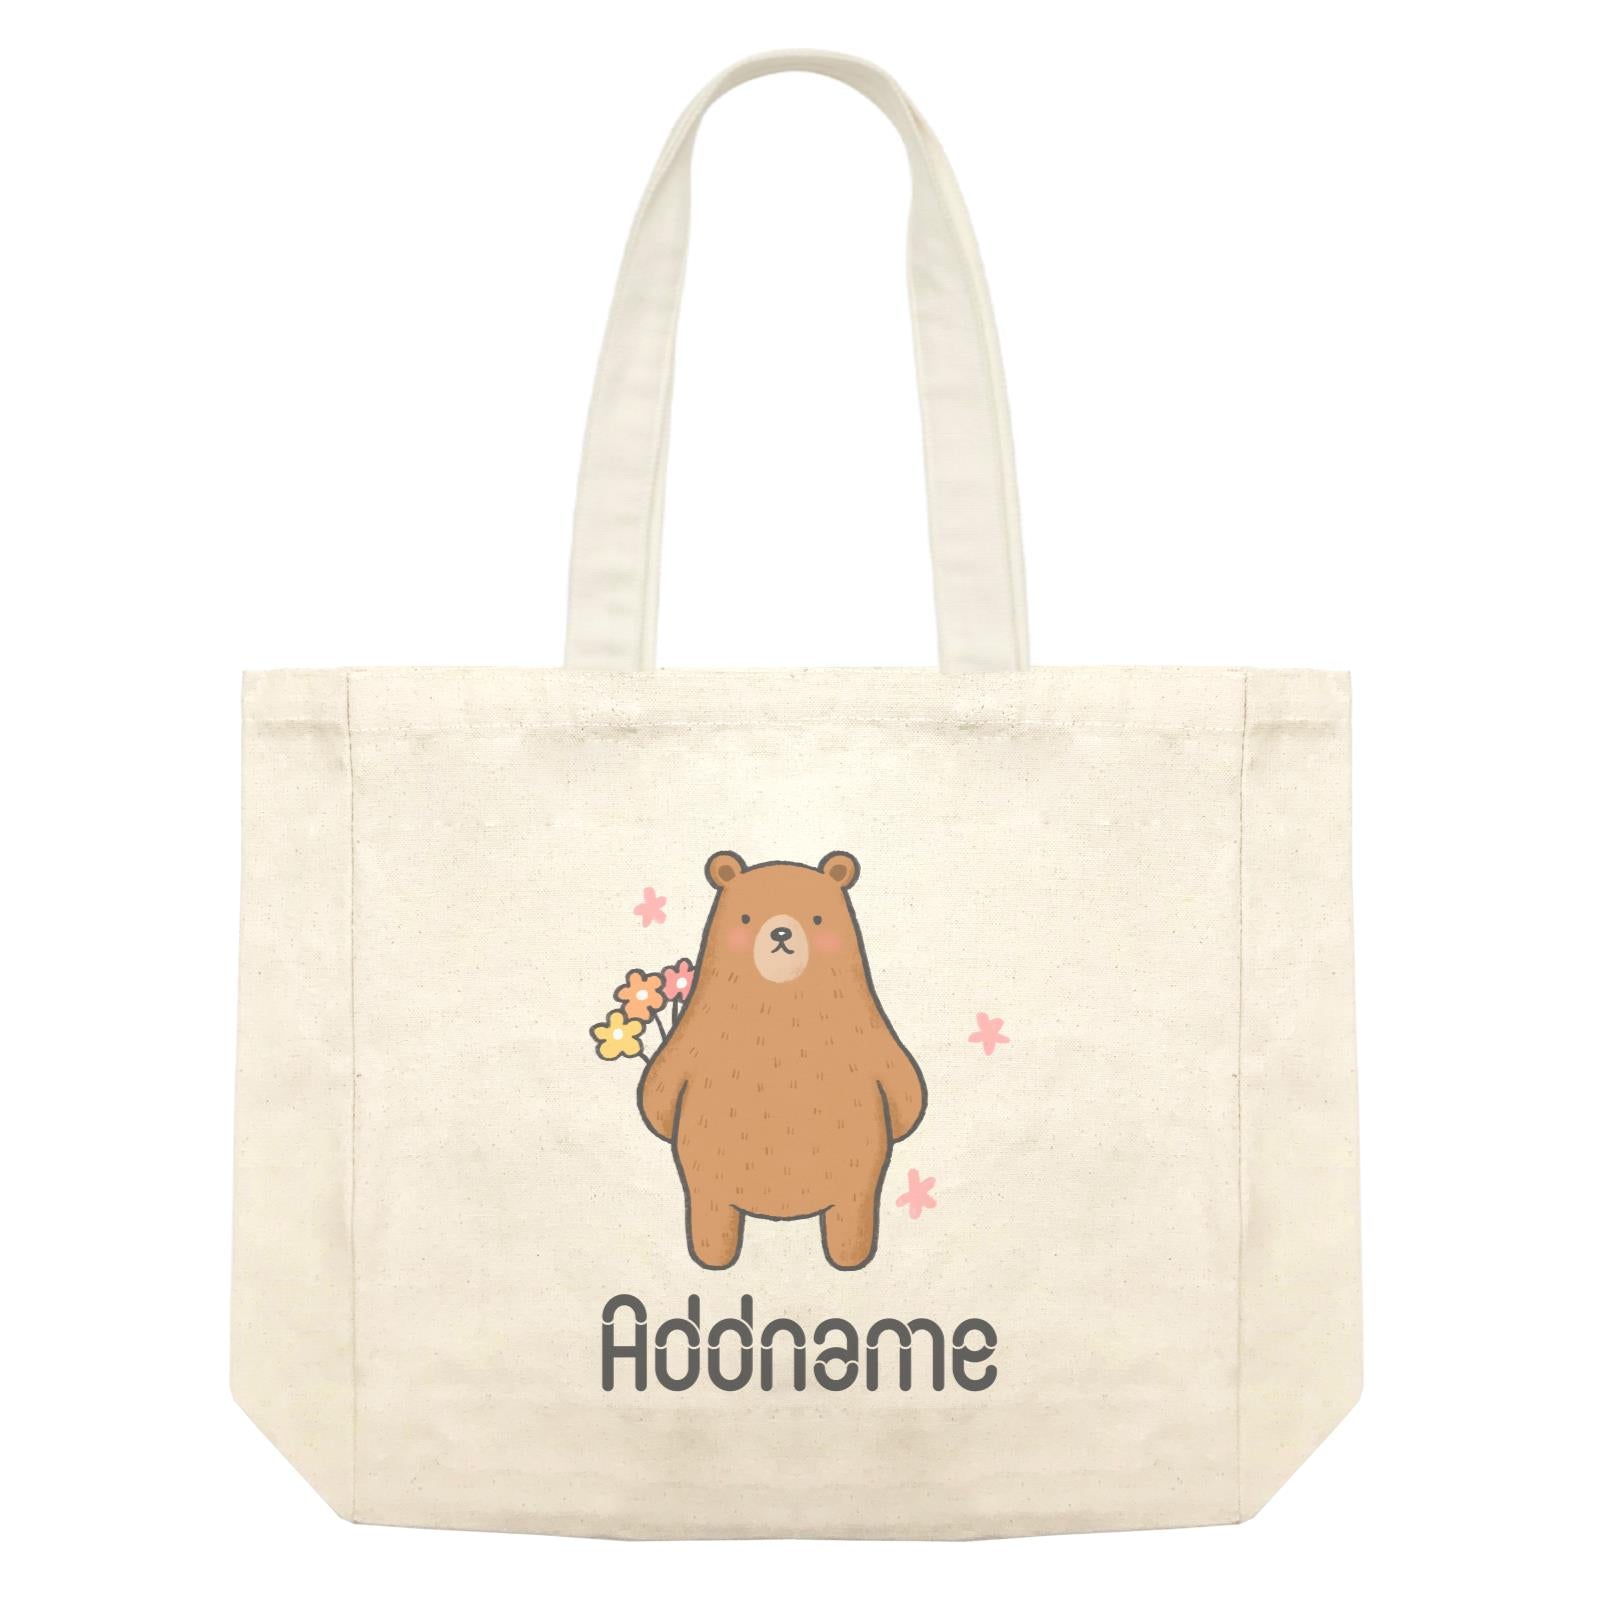 Cute Hand Drawn Style Bear with Flowers Addname Shopping Bag